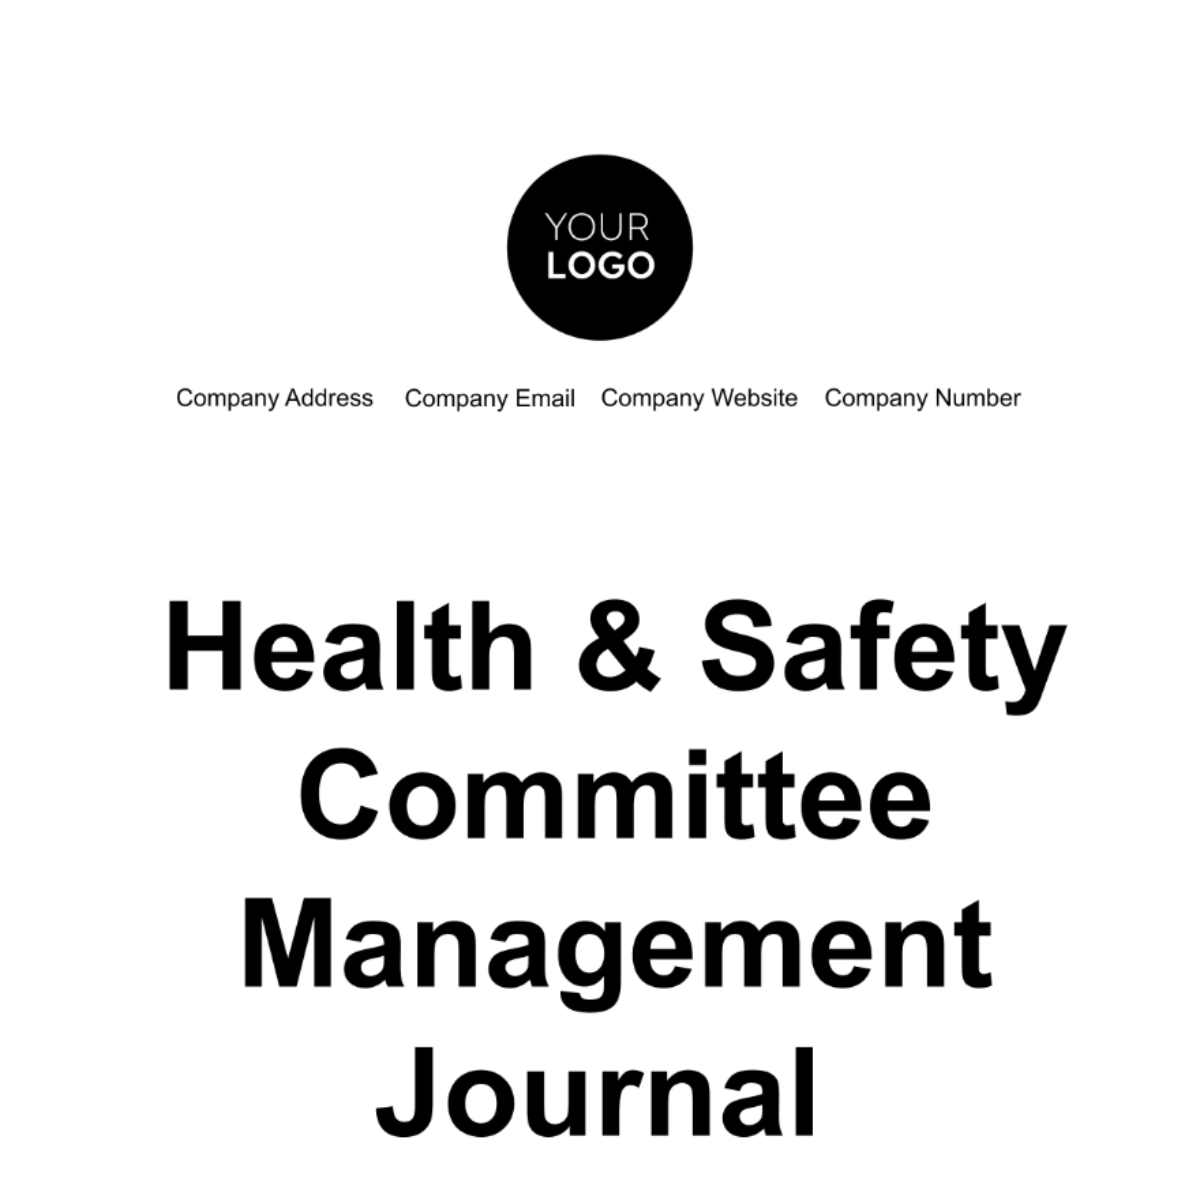 Free Health & Safety Committee Management Journal Template